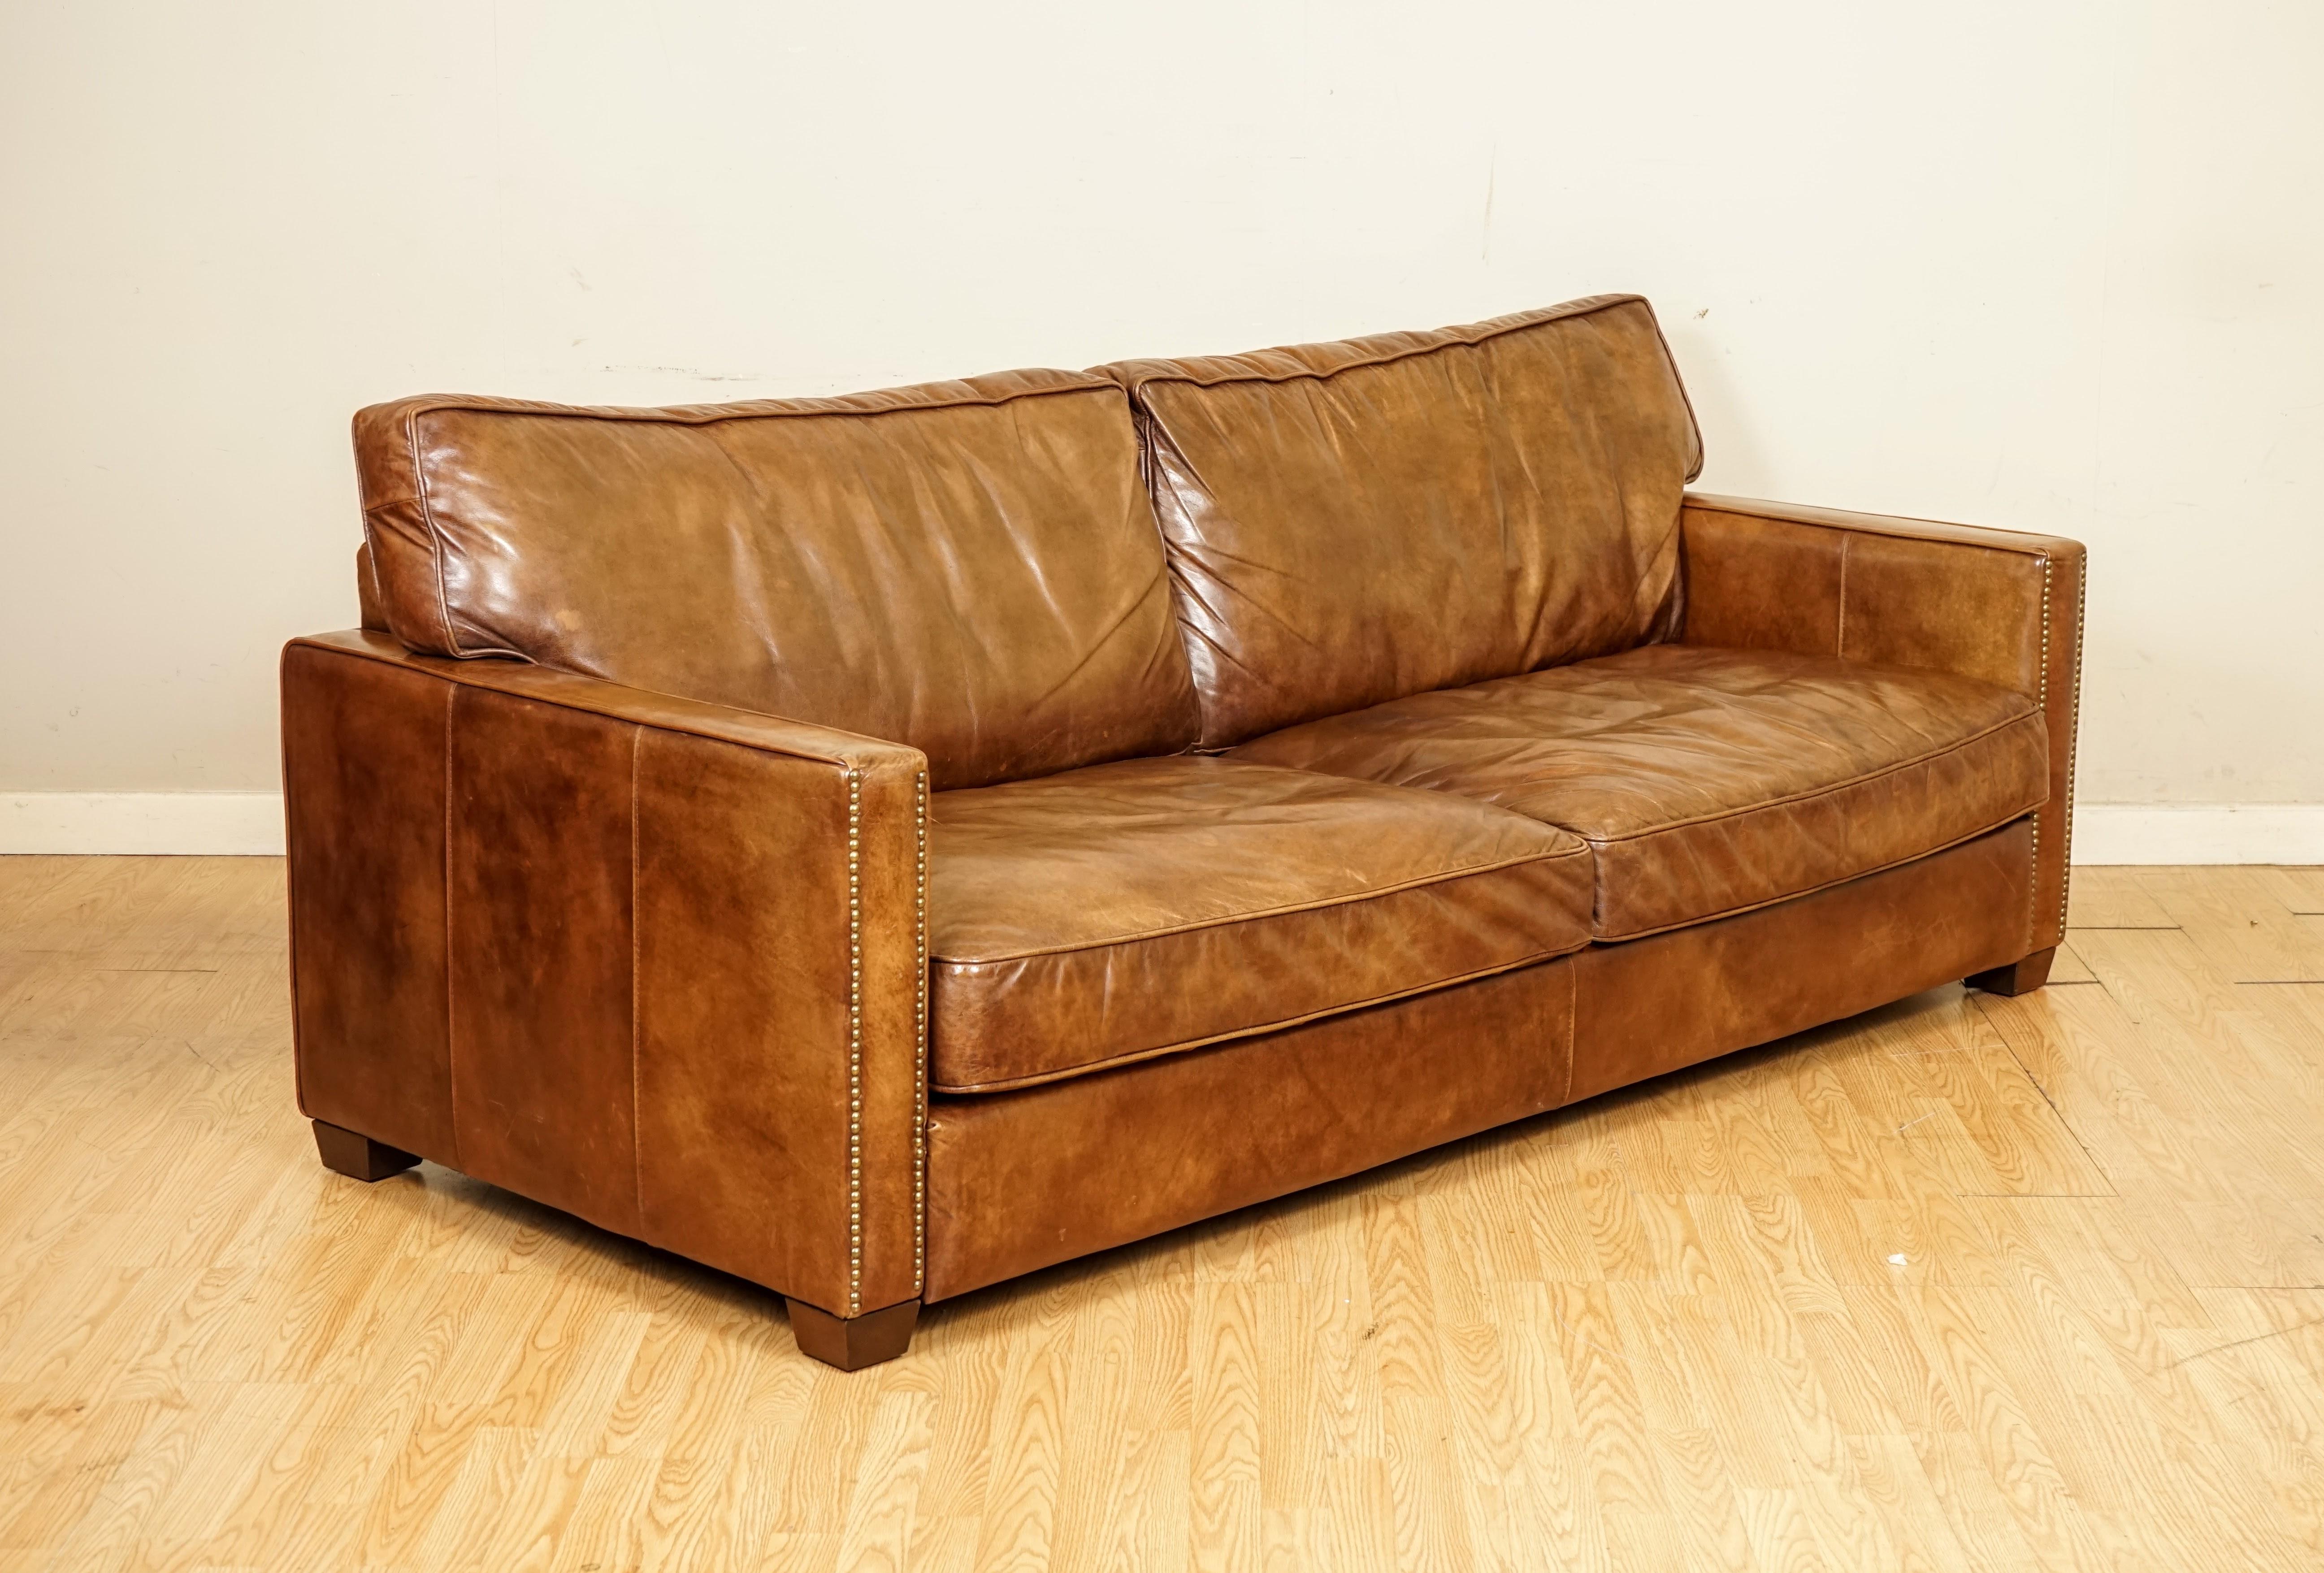 We are so excited to present to you this Gorgeous Timothy Oulton Viscount brown leather sofa.

The Viscount William range is a true Timothy Oulton Classic, looking comfortably at home everywhere from modern loft apartments to more traditionally